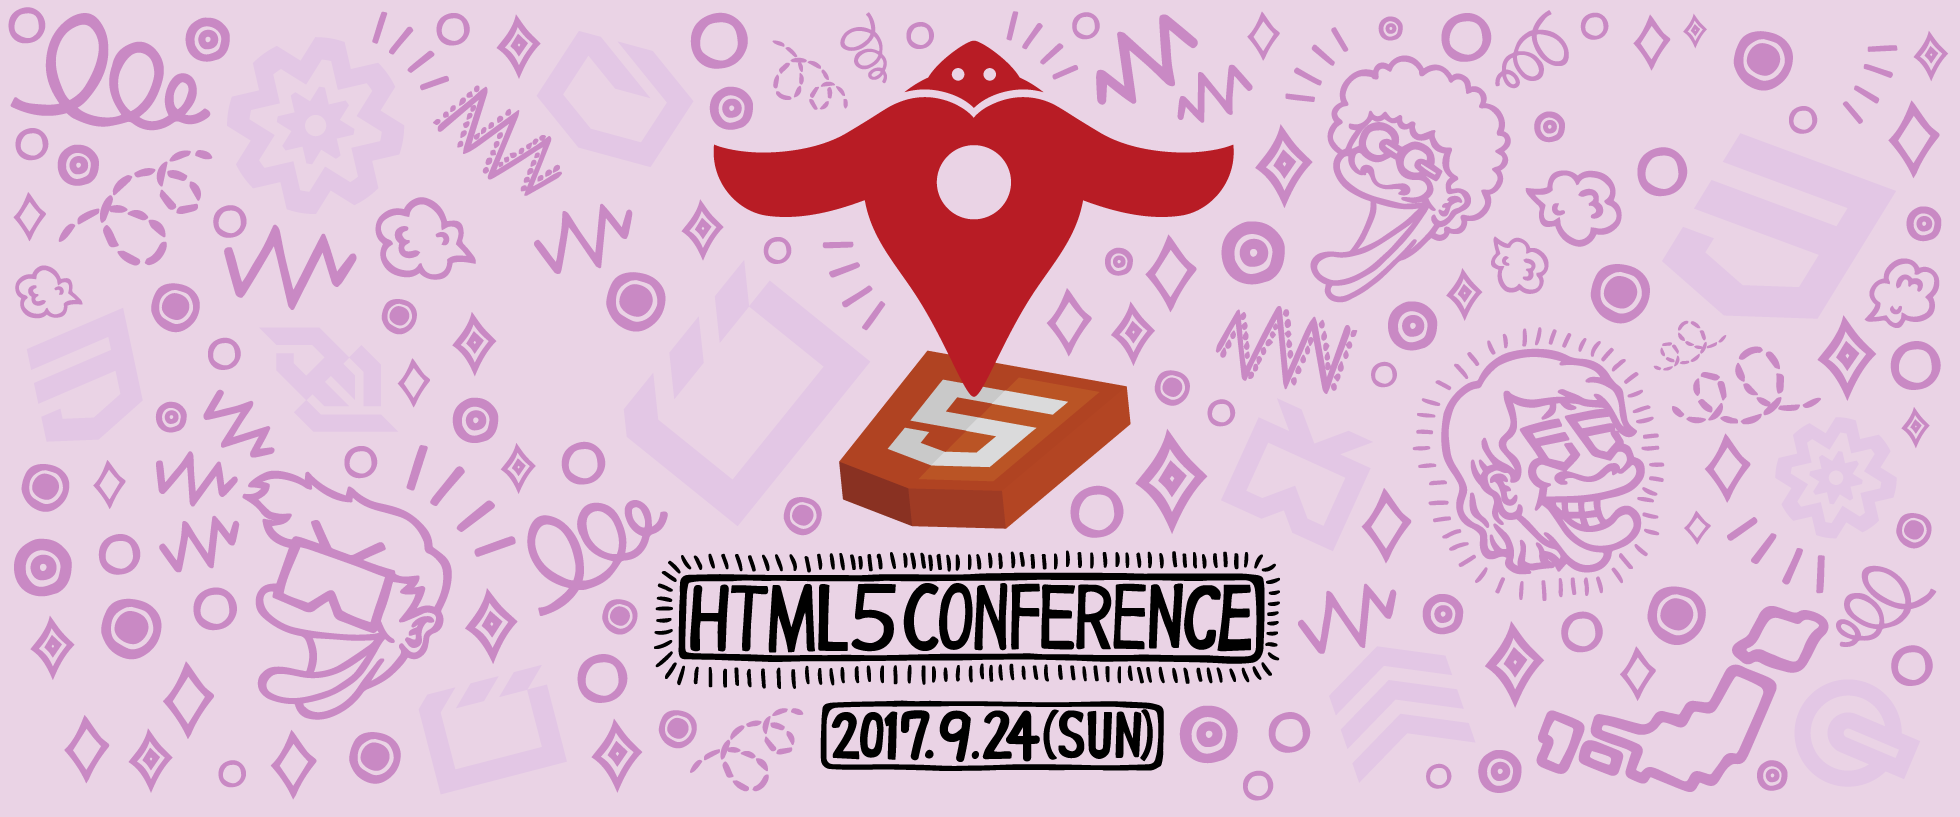 html5conference.png